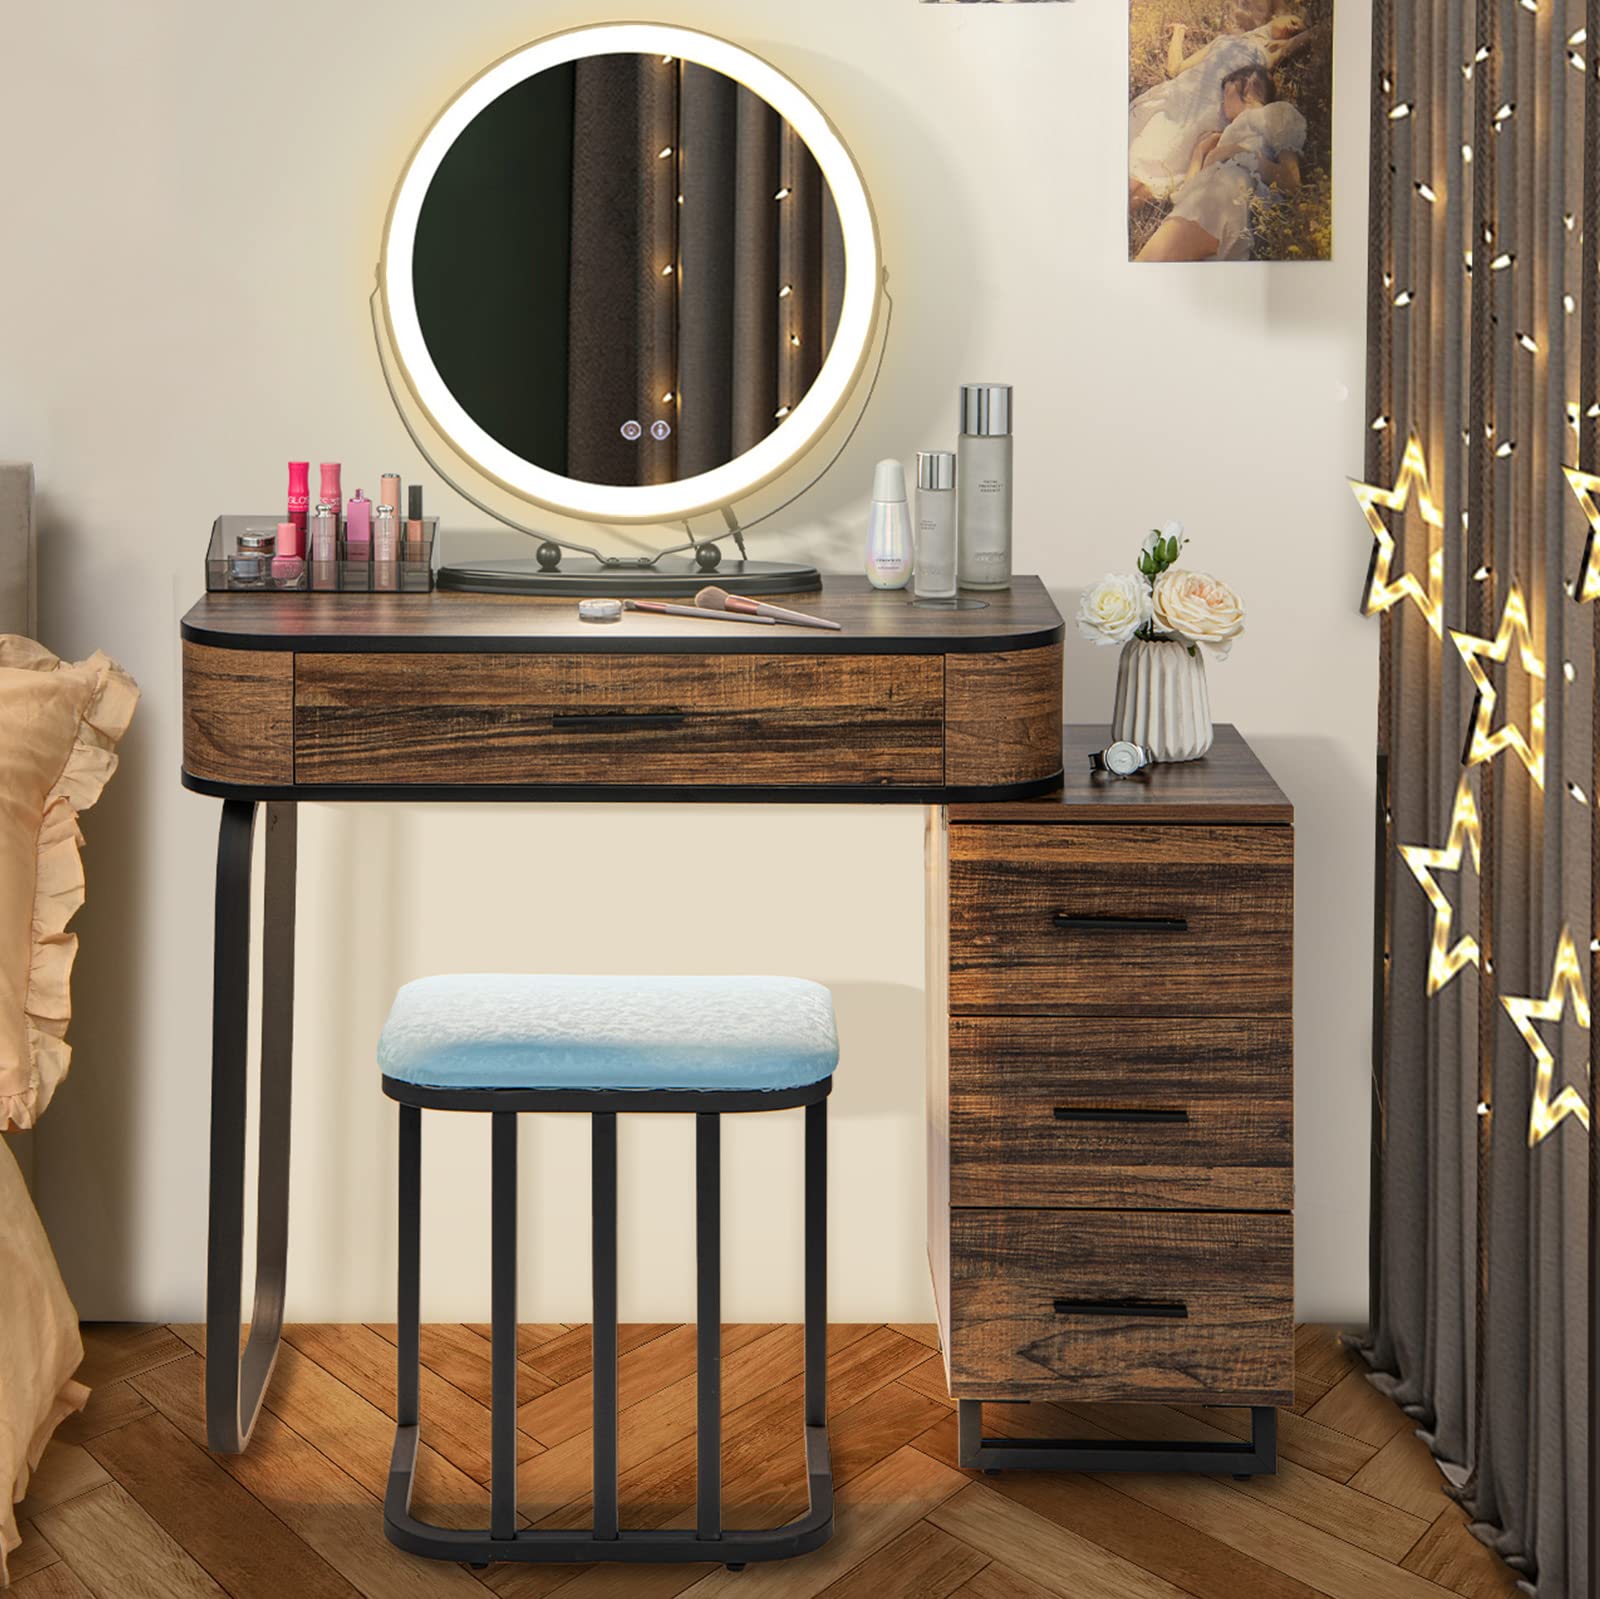 CHARMAID Makeup Vanity Table with Lights, Vanity Desk with 3 Color Lighted Mirror, Rustic Brown